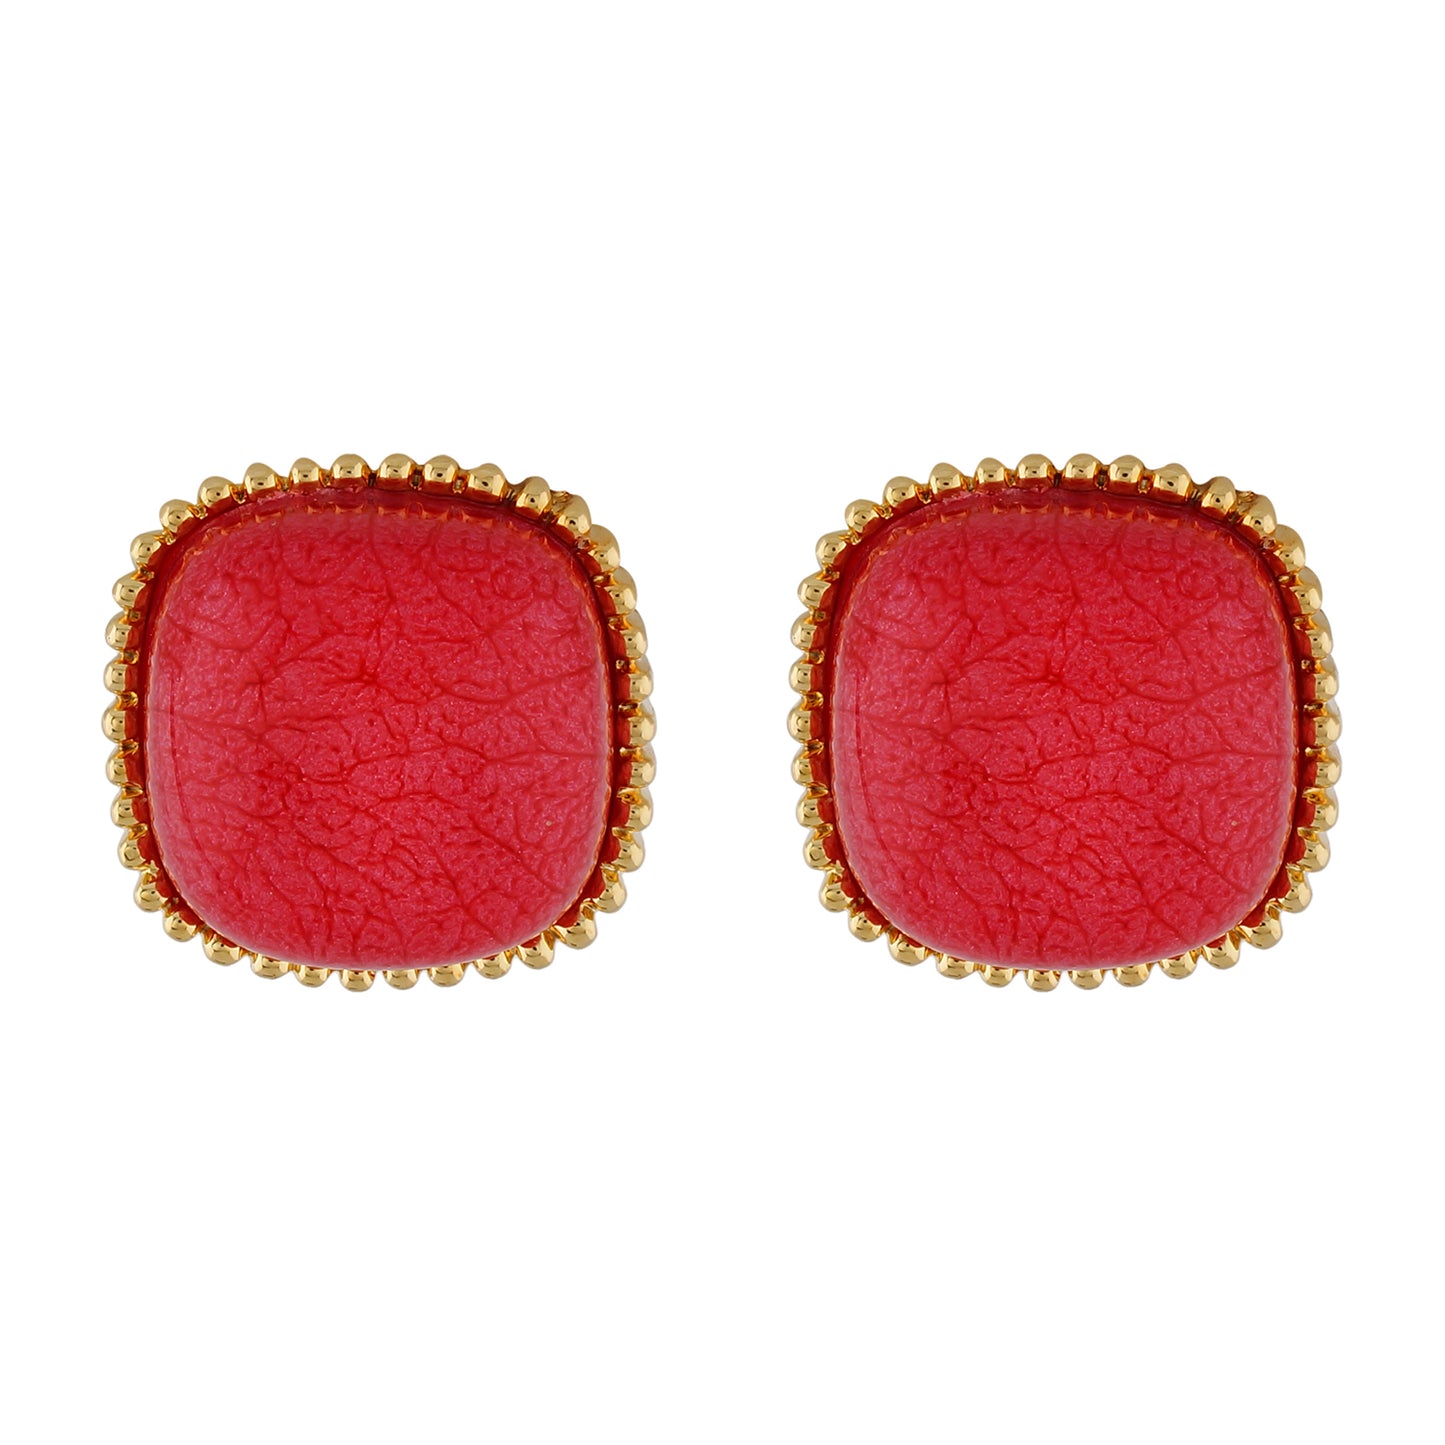 Wonderful Tomato Red Colour Square Shape Earring for Girls and Women